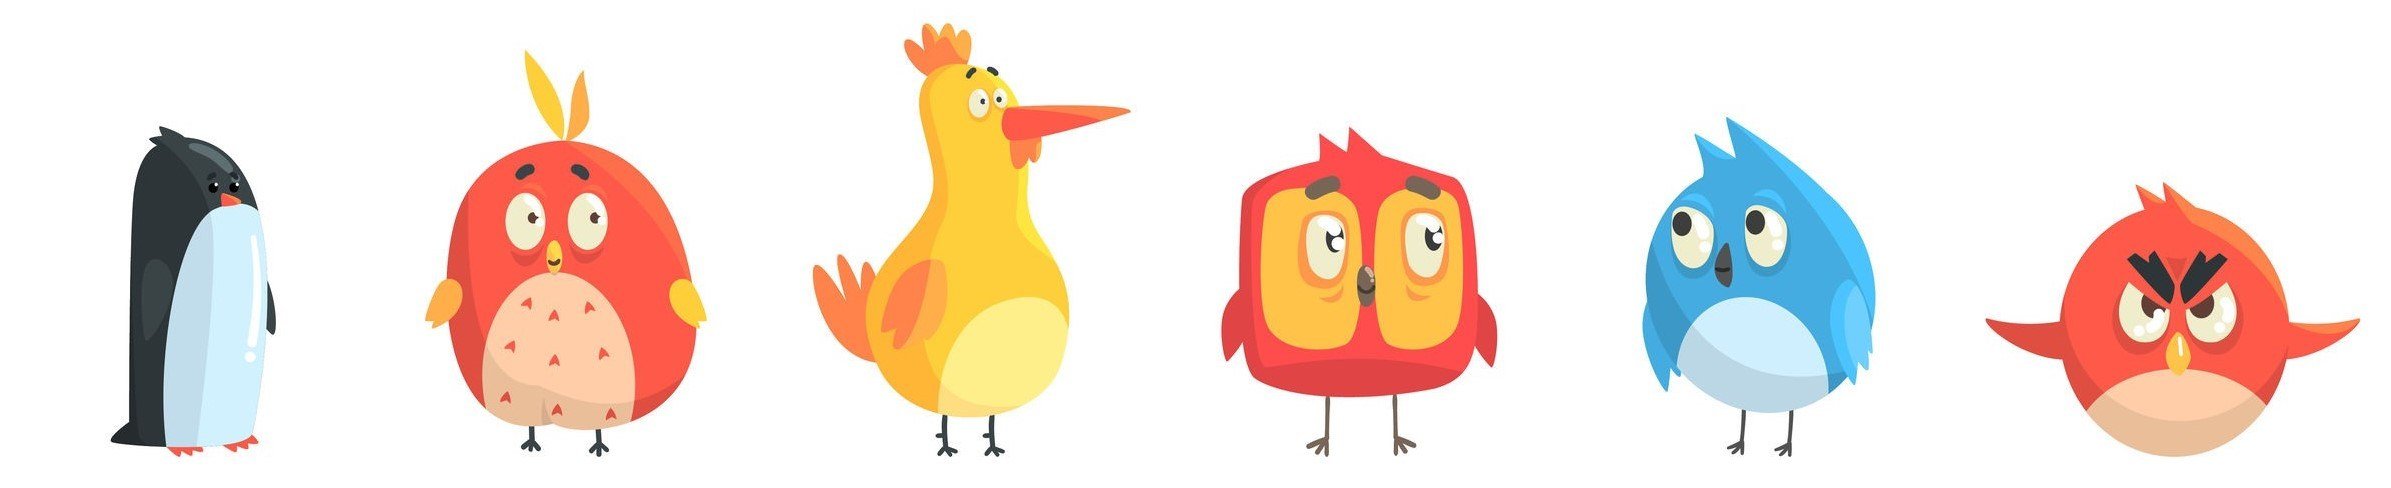 angry bird like characters 1 - The 8 Best at Home Workouts (No-Equipment!)